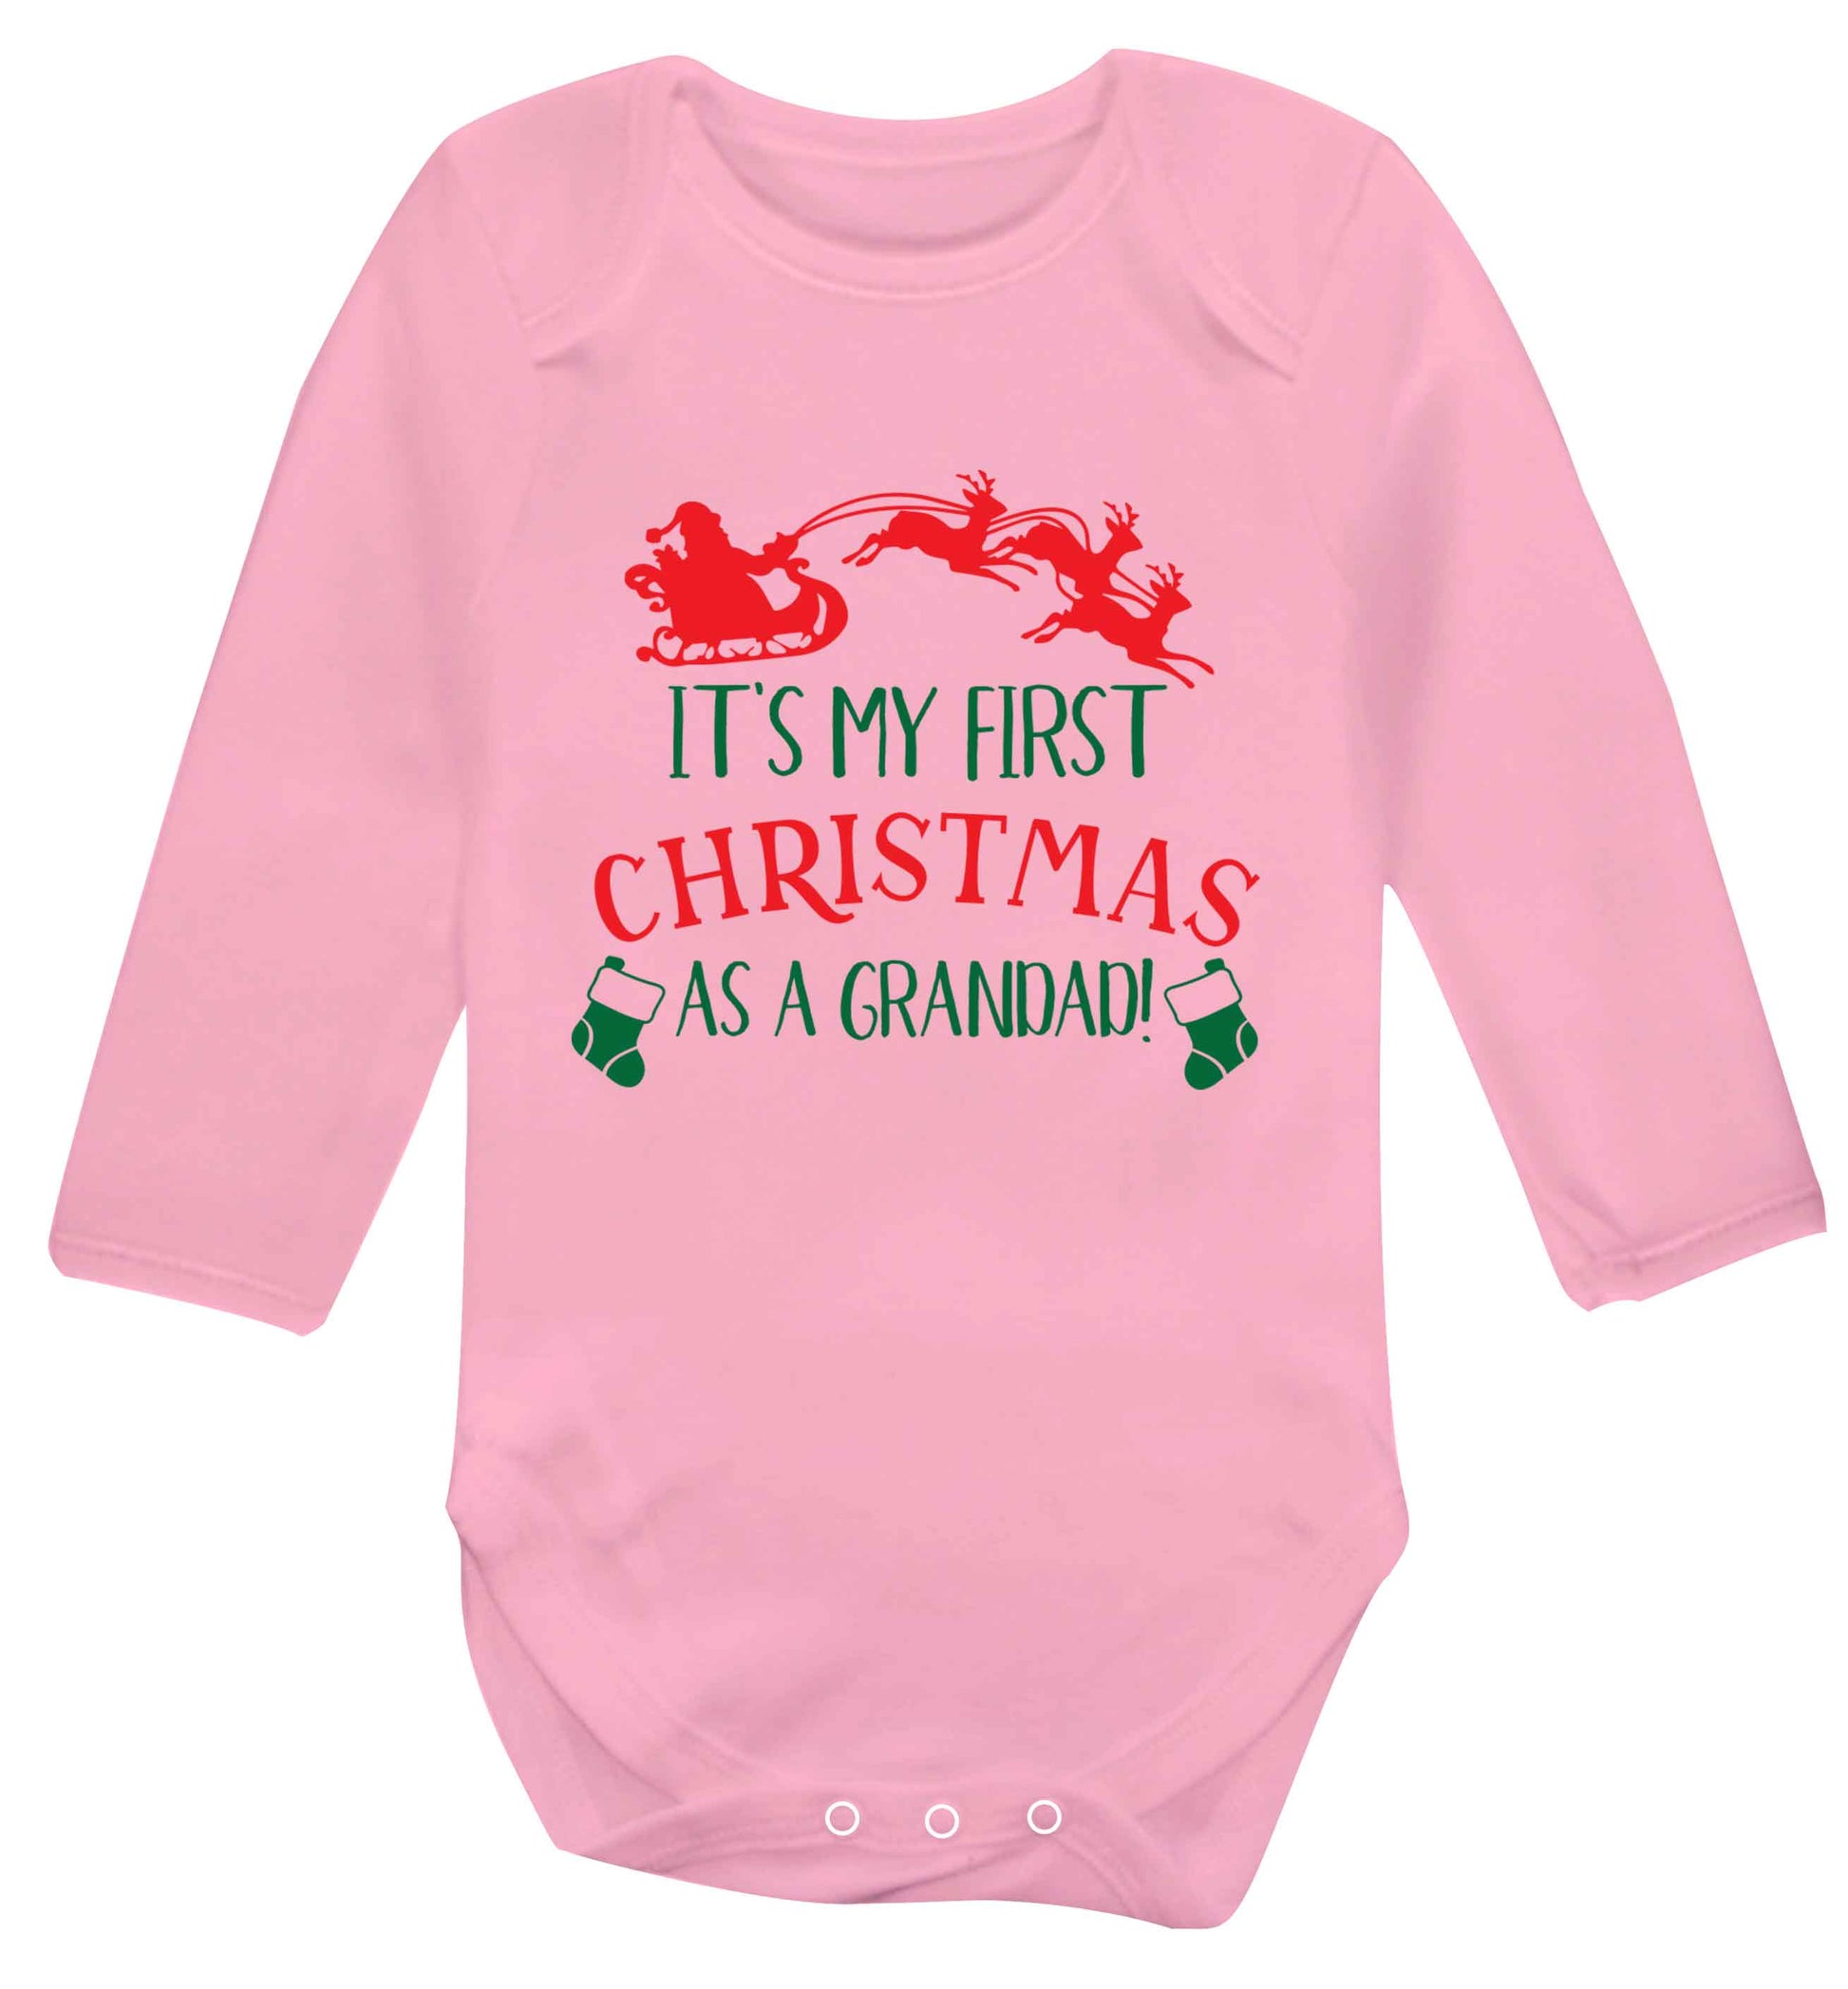 It's my first Christmas as a grandad! Baby Vest long sleeved pale pink 6-12 months